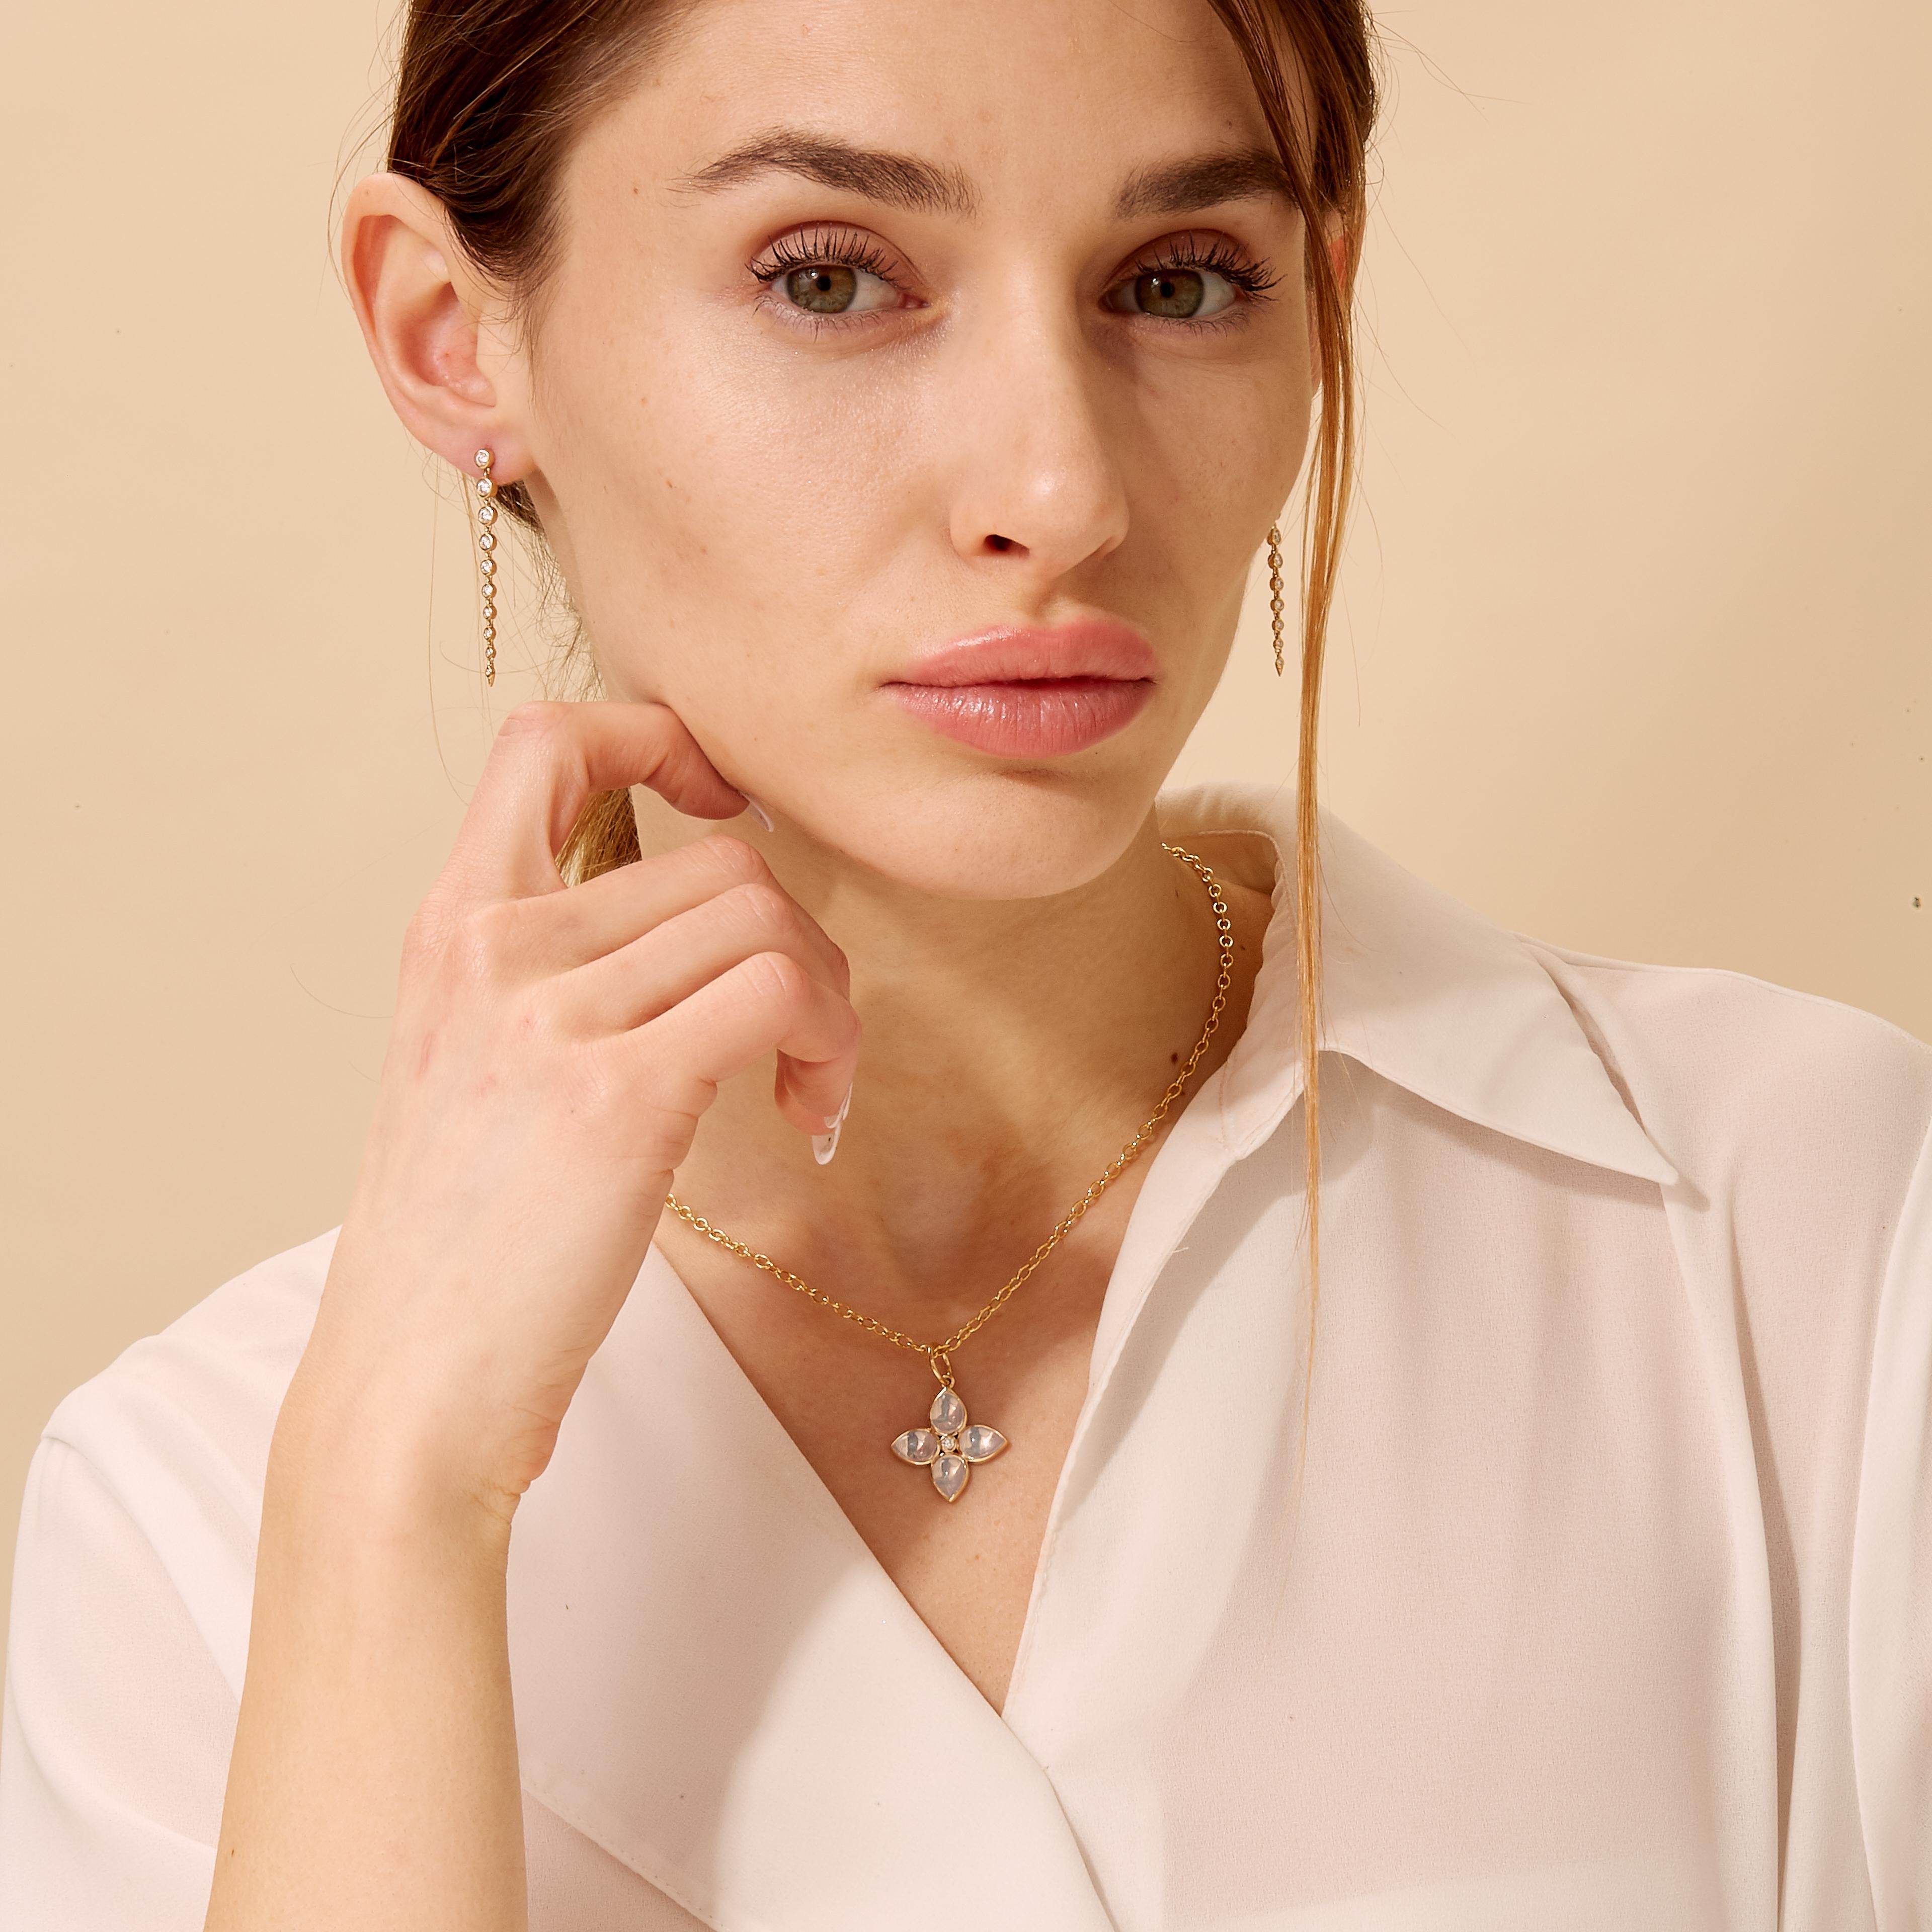 Created in 18 karat yellow gold
Moon quartz 5 carats approx.
Diamonds 0.04 carat approx.
Chain sold separately

Exquisitely-sculpted from 18K yellow gold, the Pendant is expertly-crafted with a 5-carat moon quartz and 0.04-carat diamonds, creating